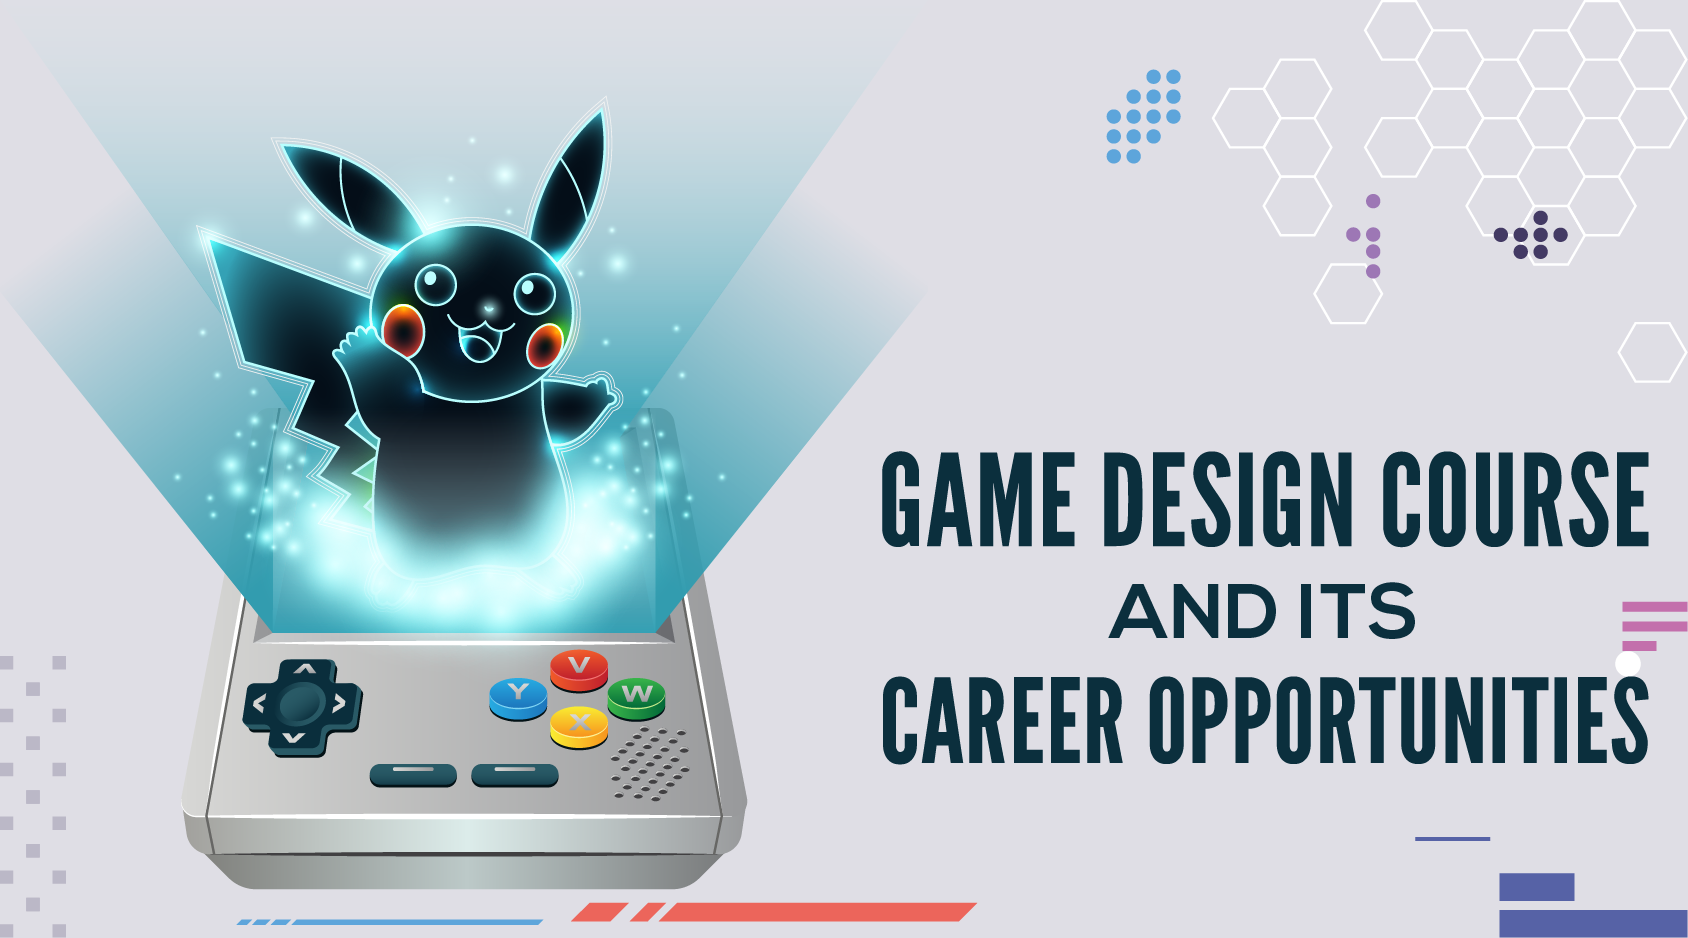 Game Design Course Guide, Eligibility, Career, Job Scope, Salary